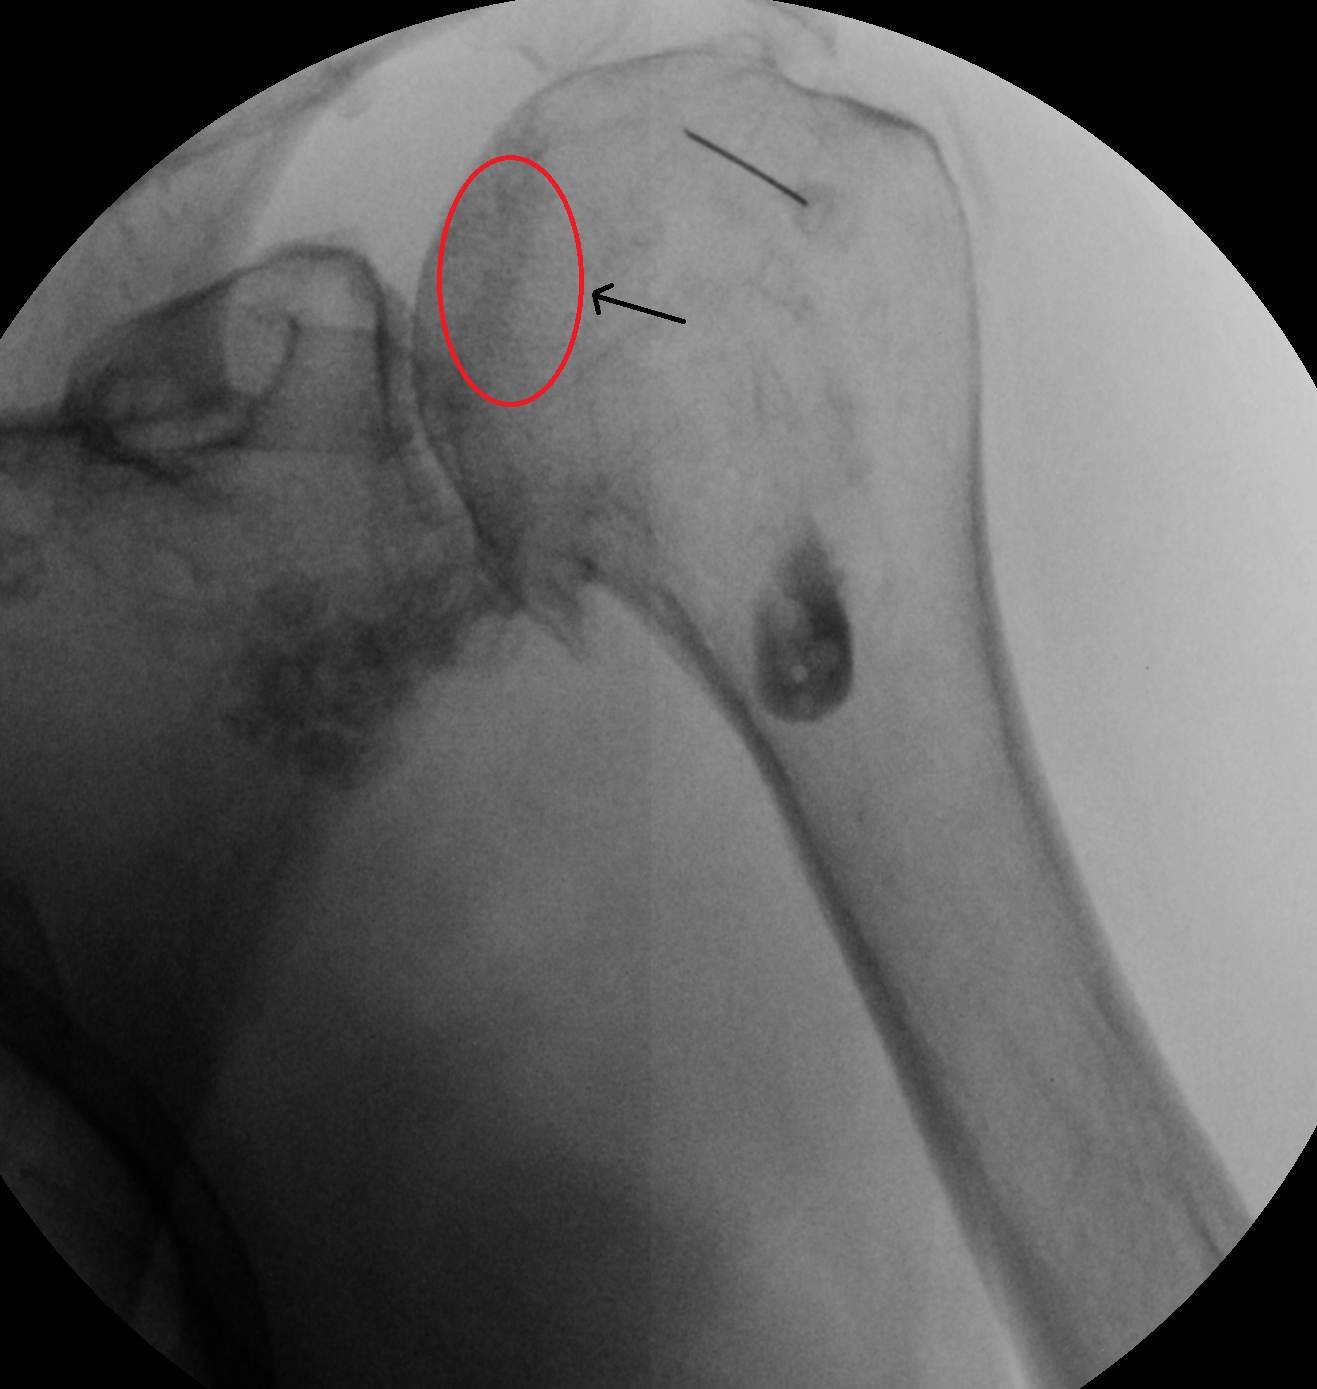 A single fluoroscopic image demonstrates a malpositioned needle within the superior aspect of the humeral head. The correct target at the superomedial humeral head is labeled with a red circle.